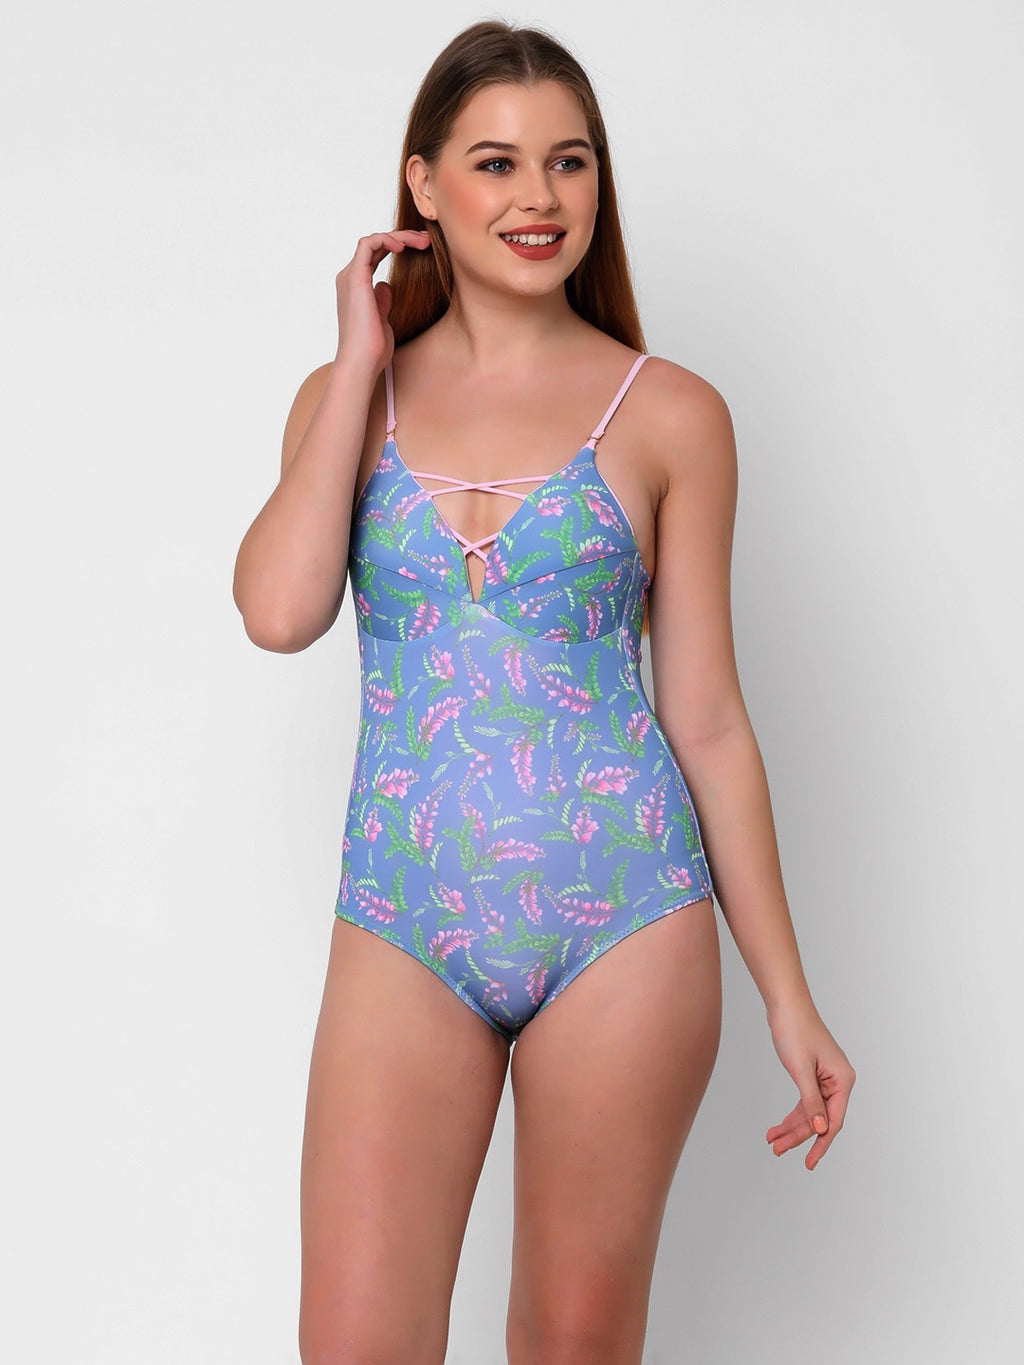 SQUEEZE THE DAY SWIMSUIT – Esha Lal Swimwear